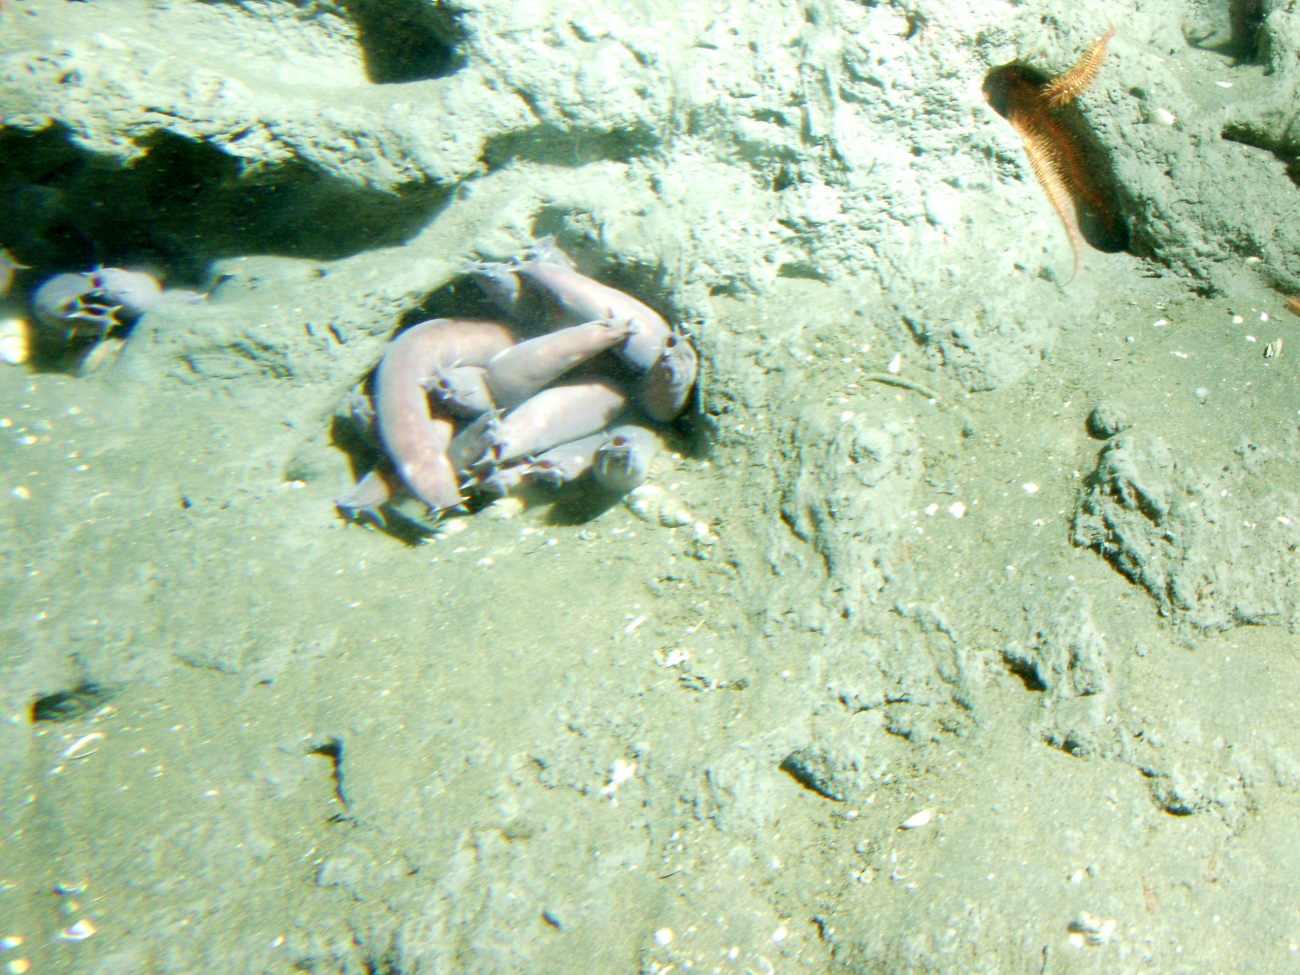 Pacific hagfish (Eptatretus stoutii) in a holeat 150 meters depth